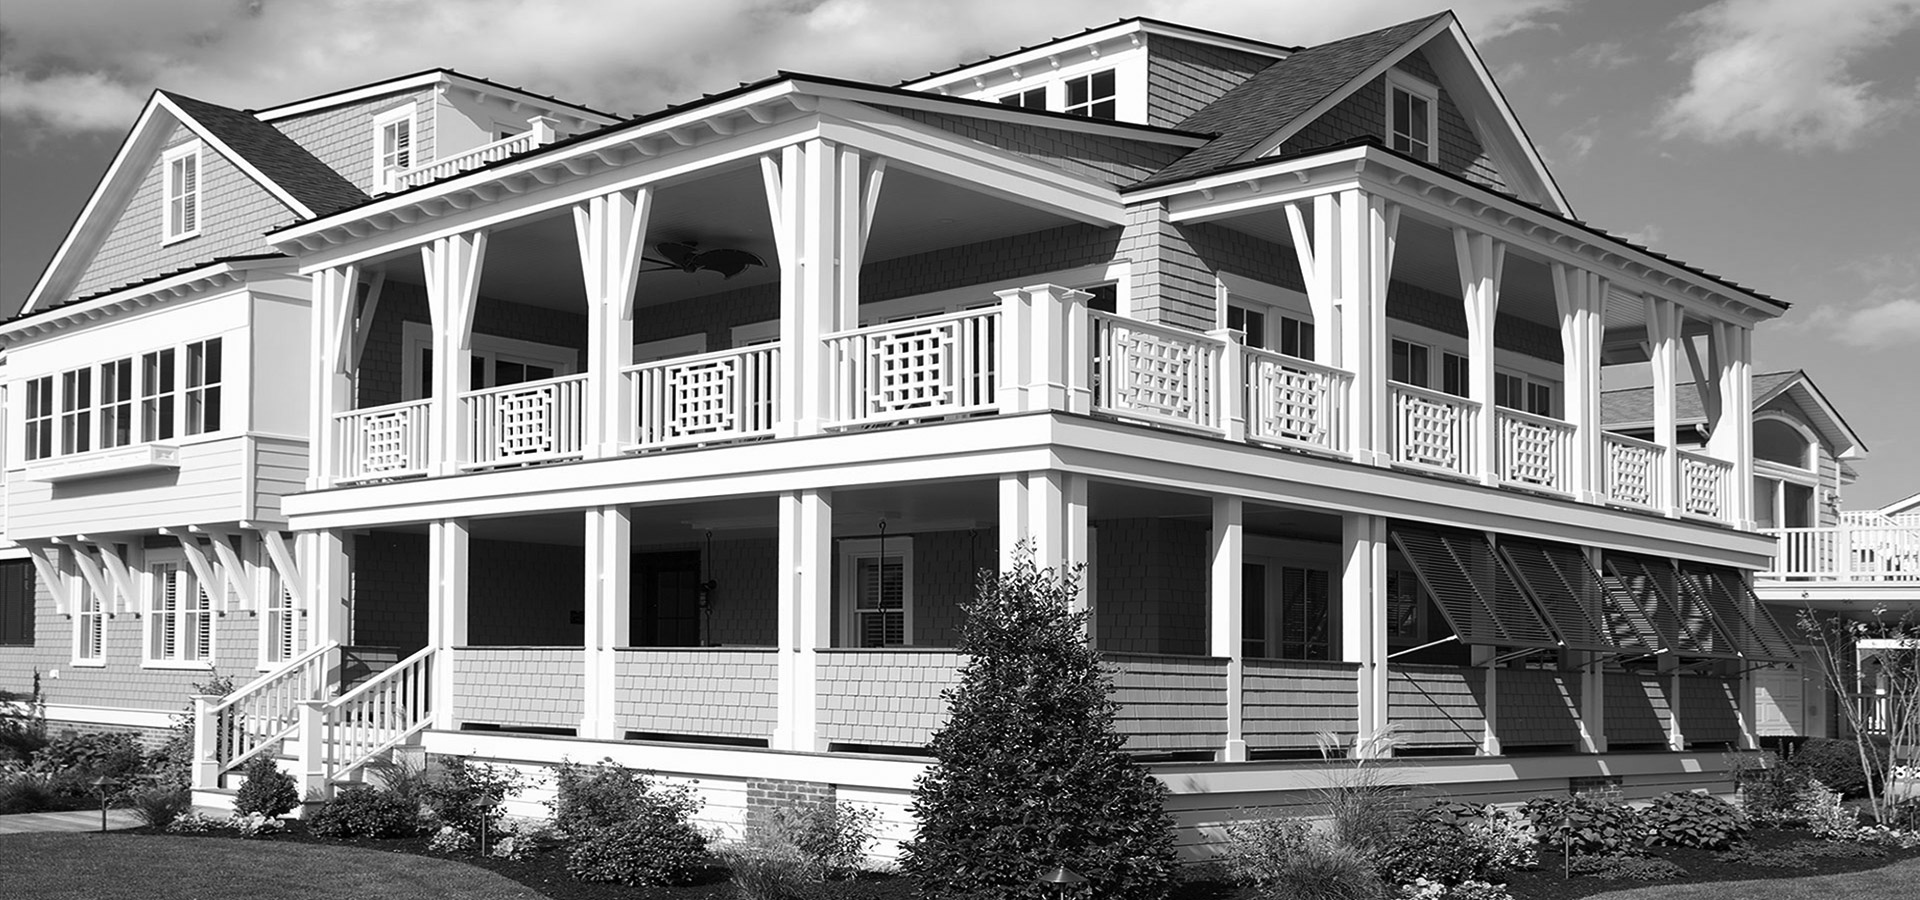 A large white house with a balcony and porch.